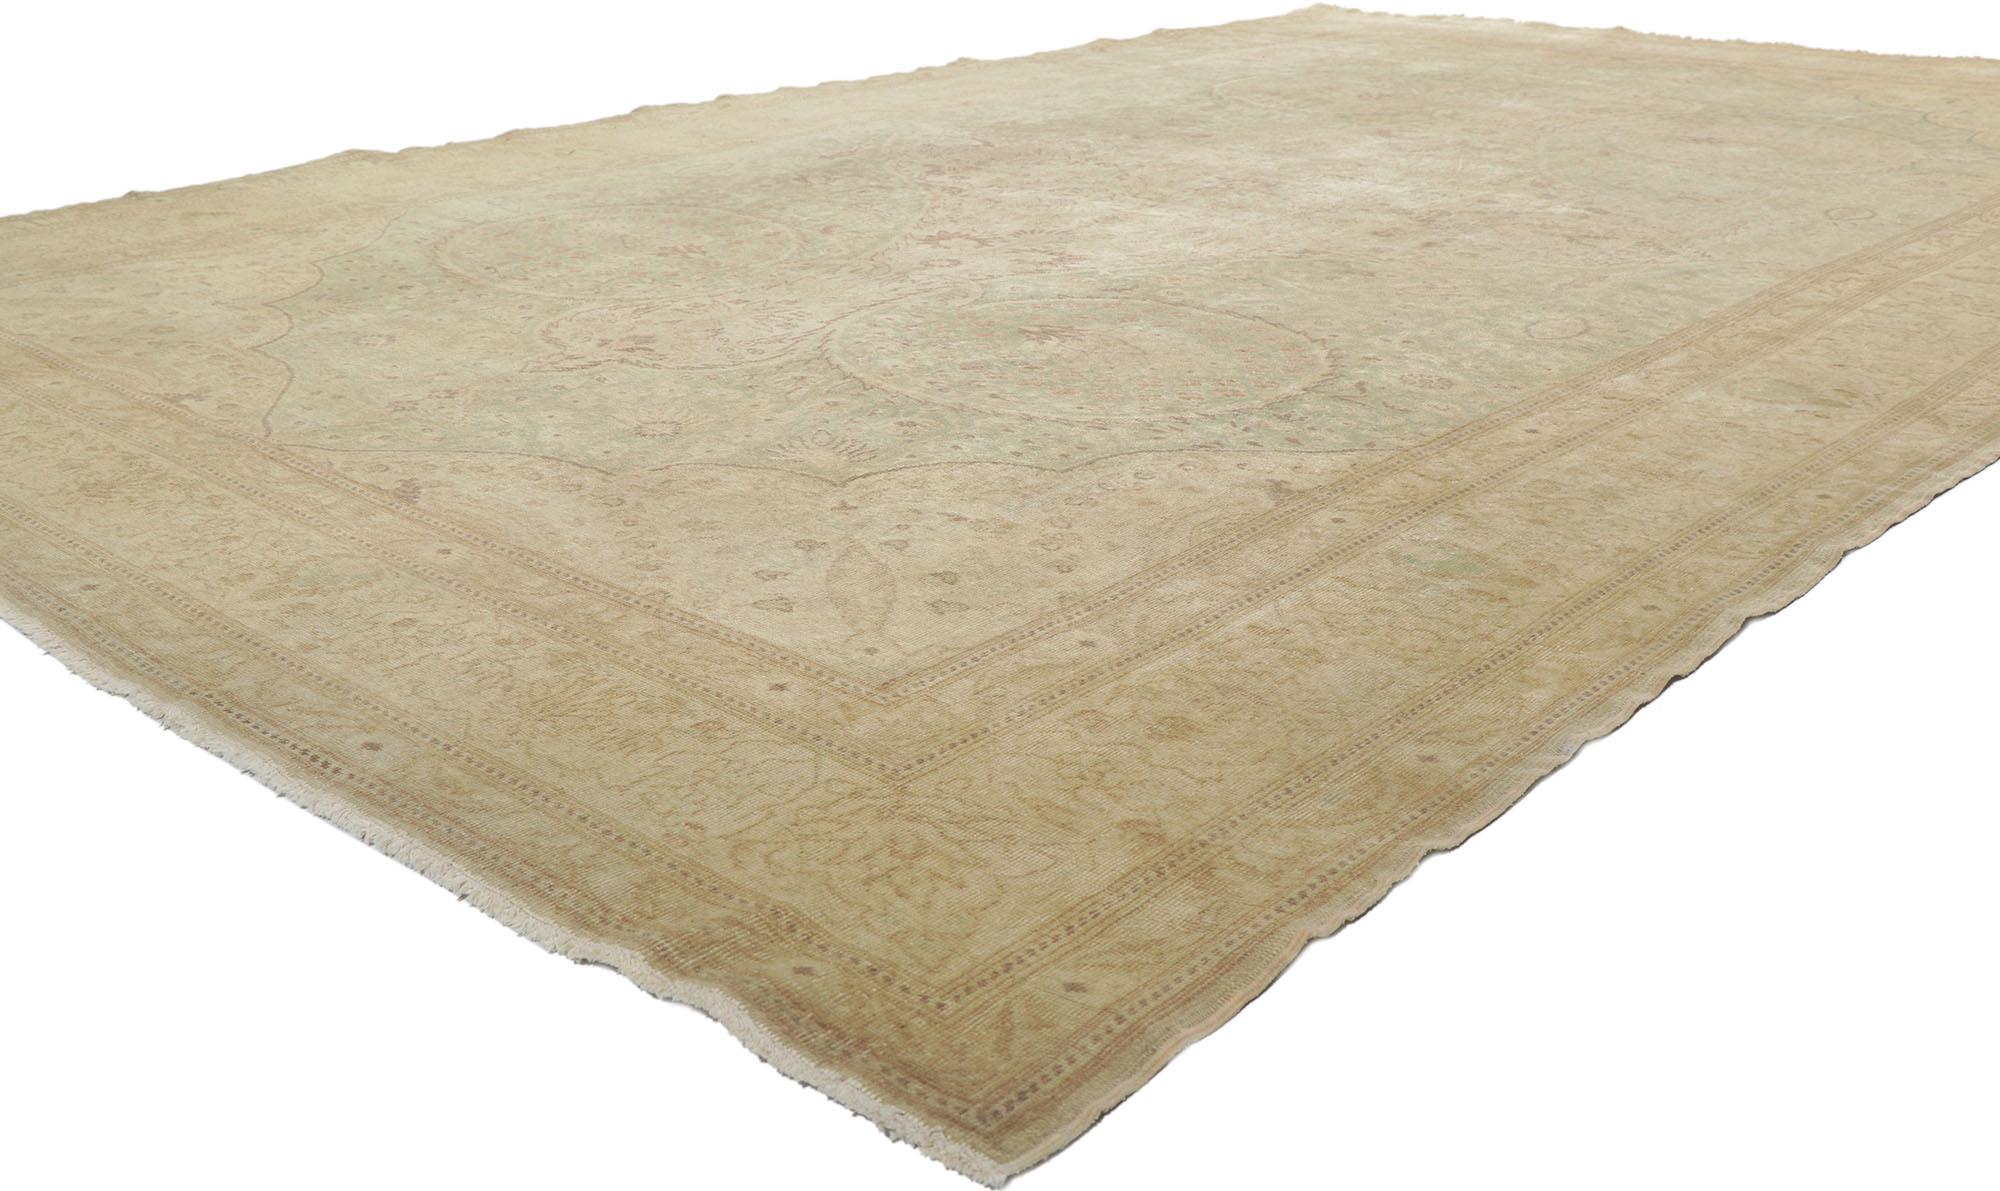 ​51292 Distressed Vintage Turkish Sivas Rug with Modern Rustic Cotswold Cottage Style 08'00 x 12'05. ​With its soft, subtle hues and cozy simplicity, this hand knotted wool distressed vintage Turkish Sivas rug charms with ease and beautifully